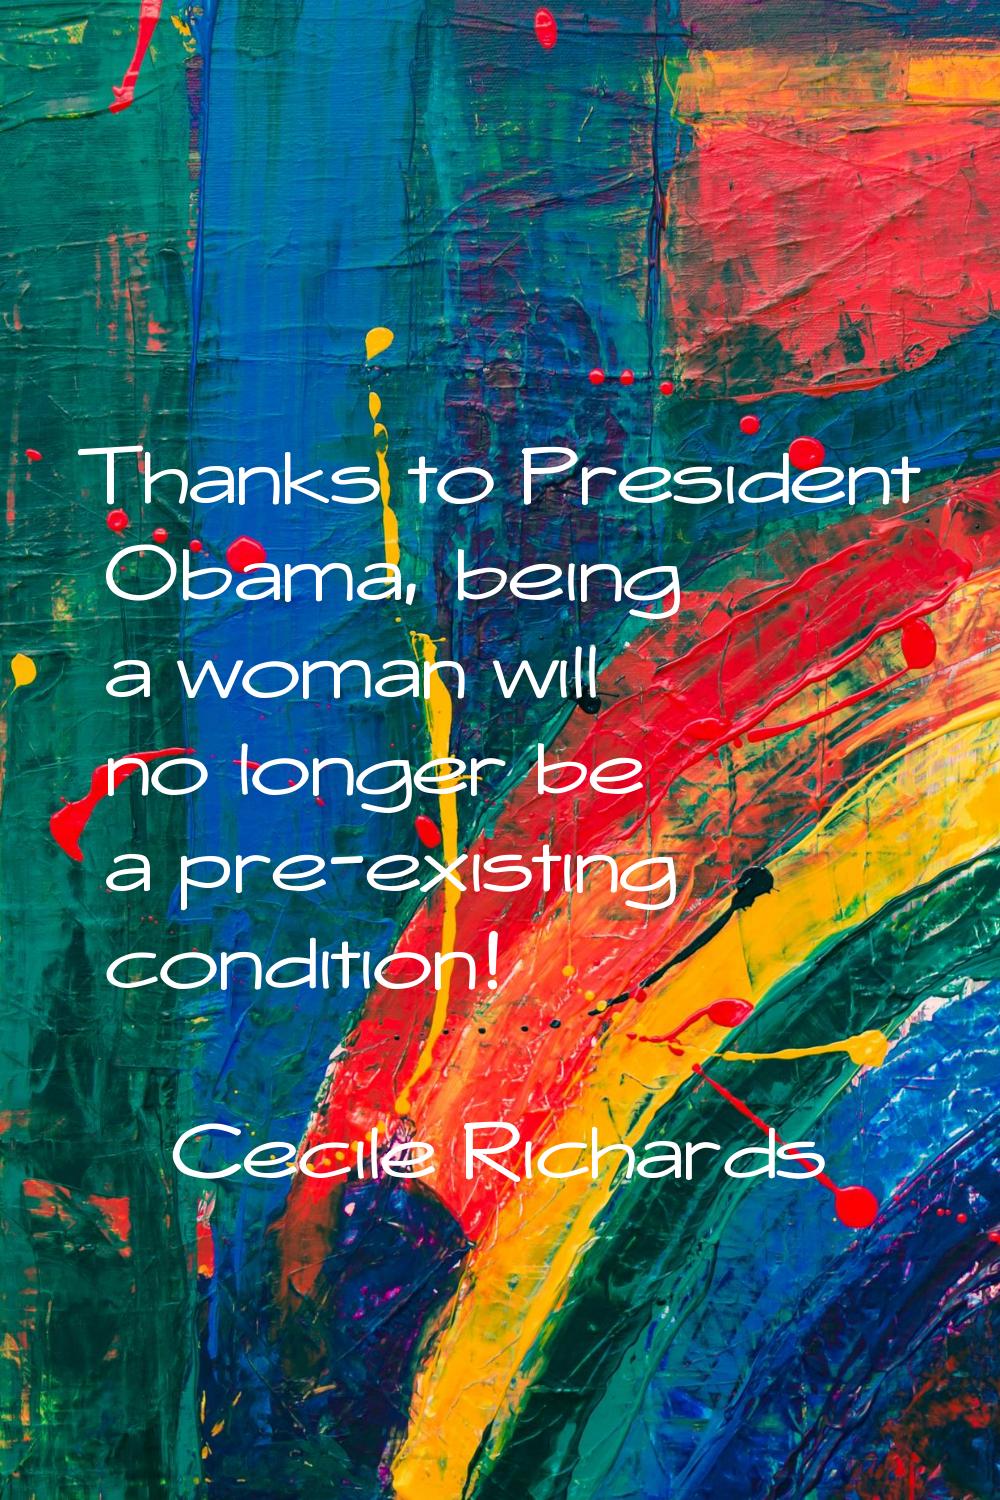 Thanks to President Obama, being a woman will no longer be a pre-existing condition!